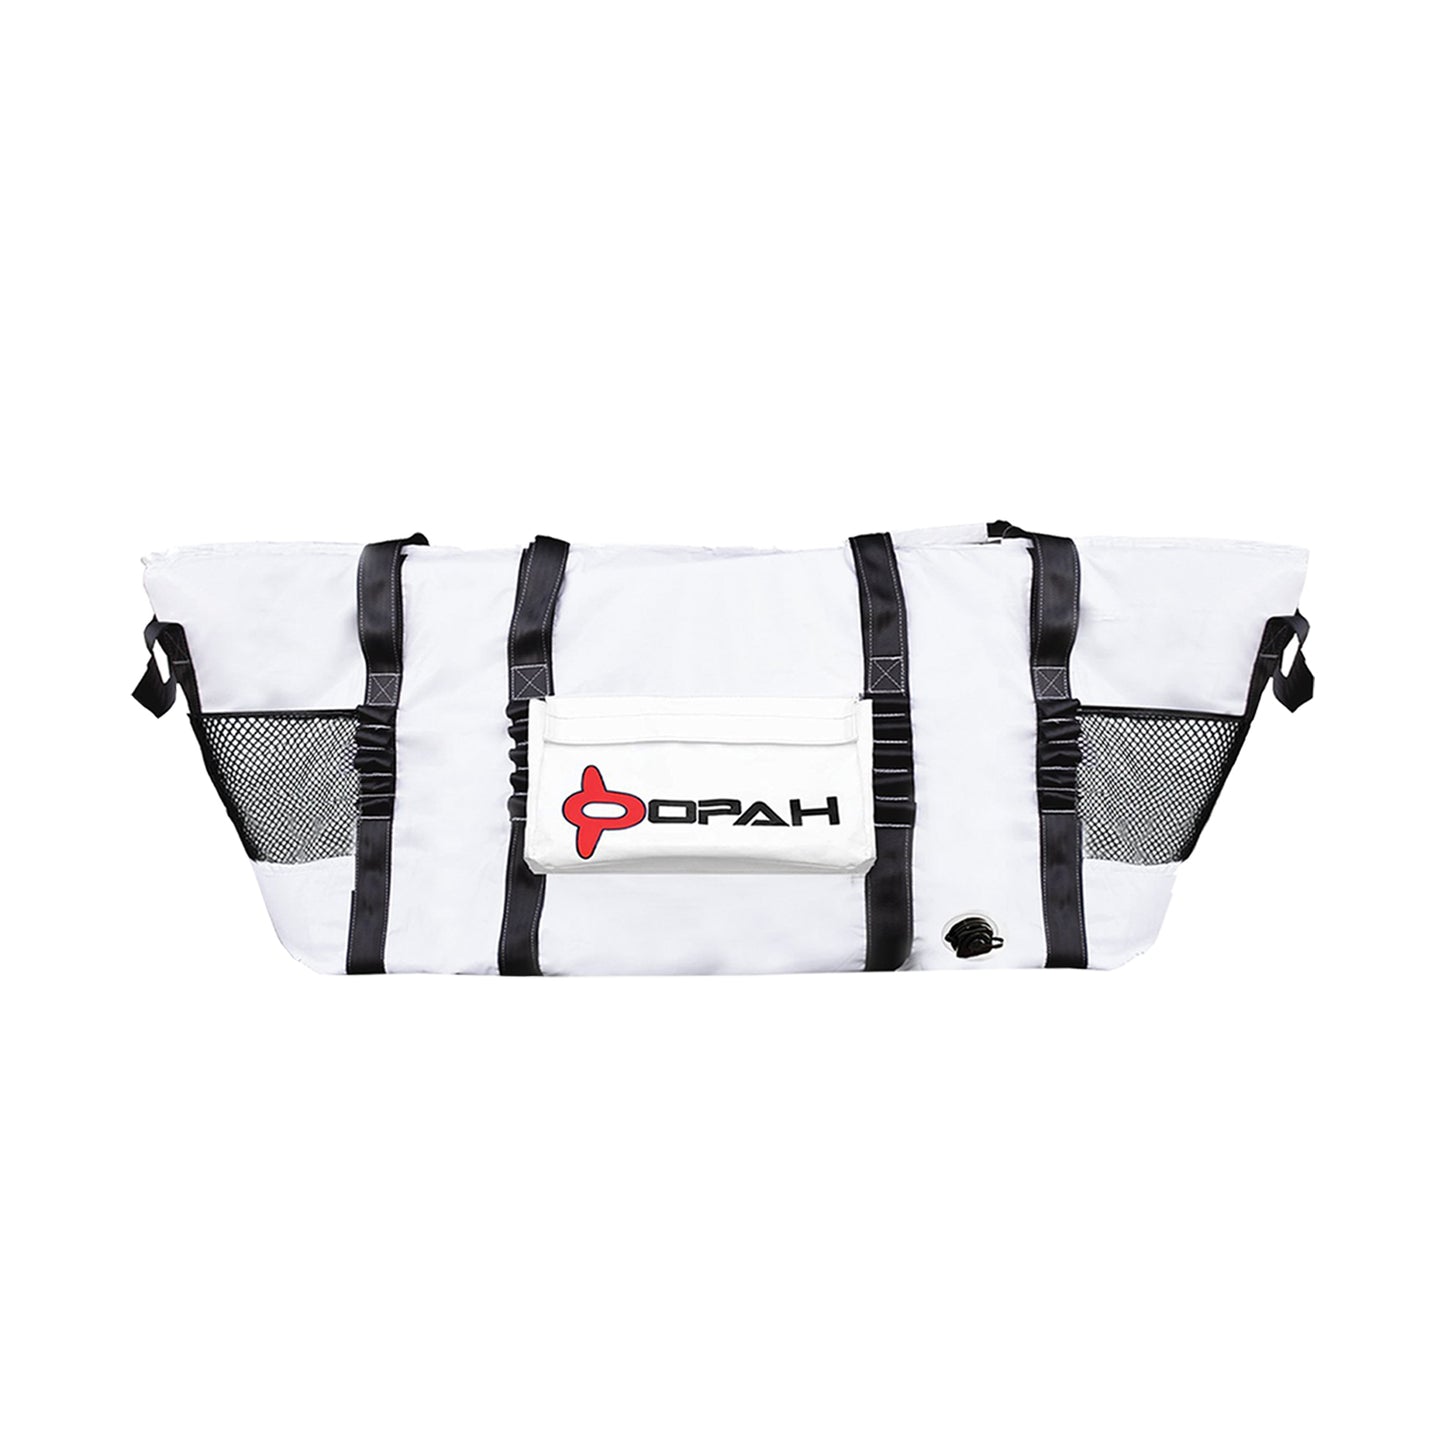 Opah Gear Fathom 6 Fish Cooler Bag Kill Bag. Protects your catch longer. The most reliable fish bag on the market. Purposely built to be the highest quality fish cooler bag in sportfishing. Even great when used as an insulated cooler bag while out camping or for other normal use. The highest quality insulated bag.